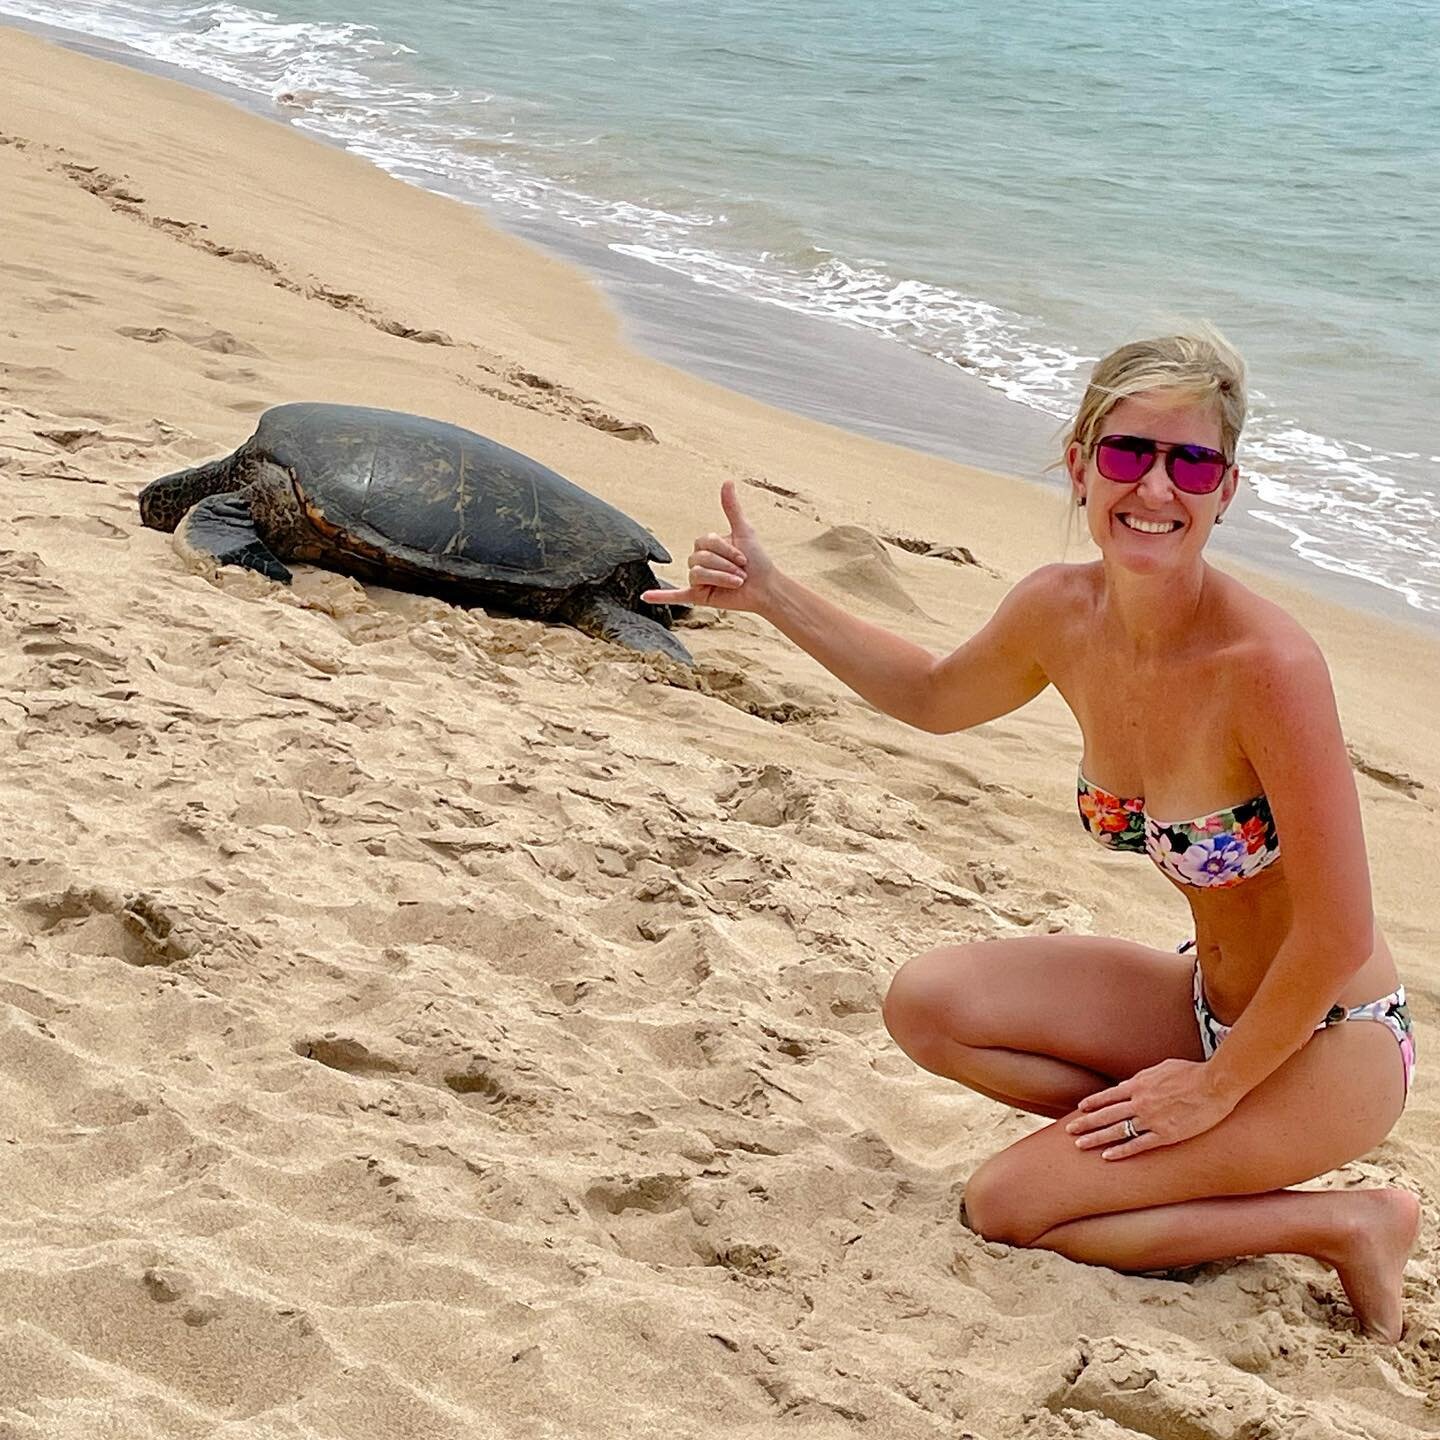 My favorite part about Hawaii is the unexpected treasures. You turn around and ✨ there&rsquo;s a giant green #seaturtle! The views, the flowers, the marine animals, Hawaii is full of beautiful things. But I&rsquo;ll tell you what&hellip; there&rsquo;